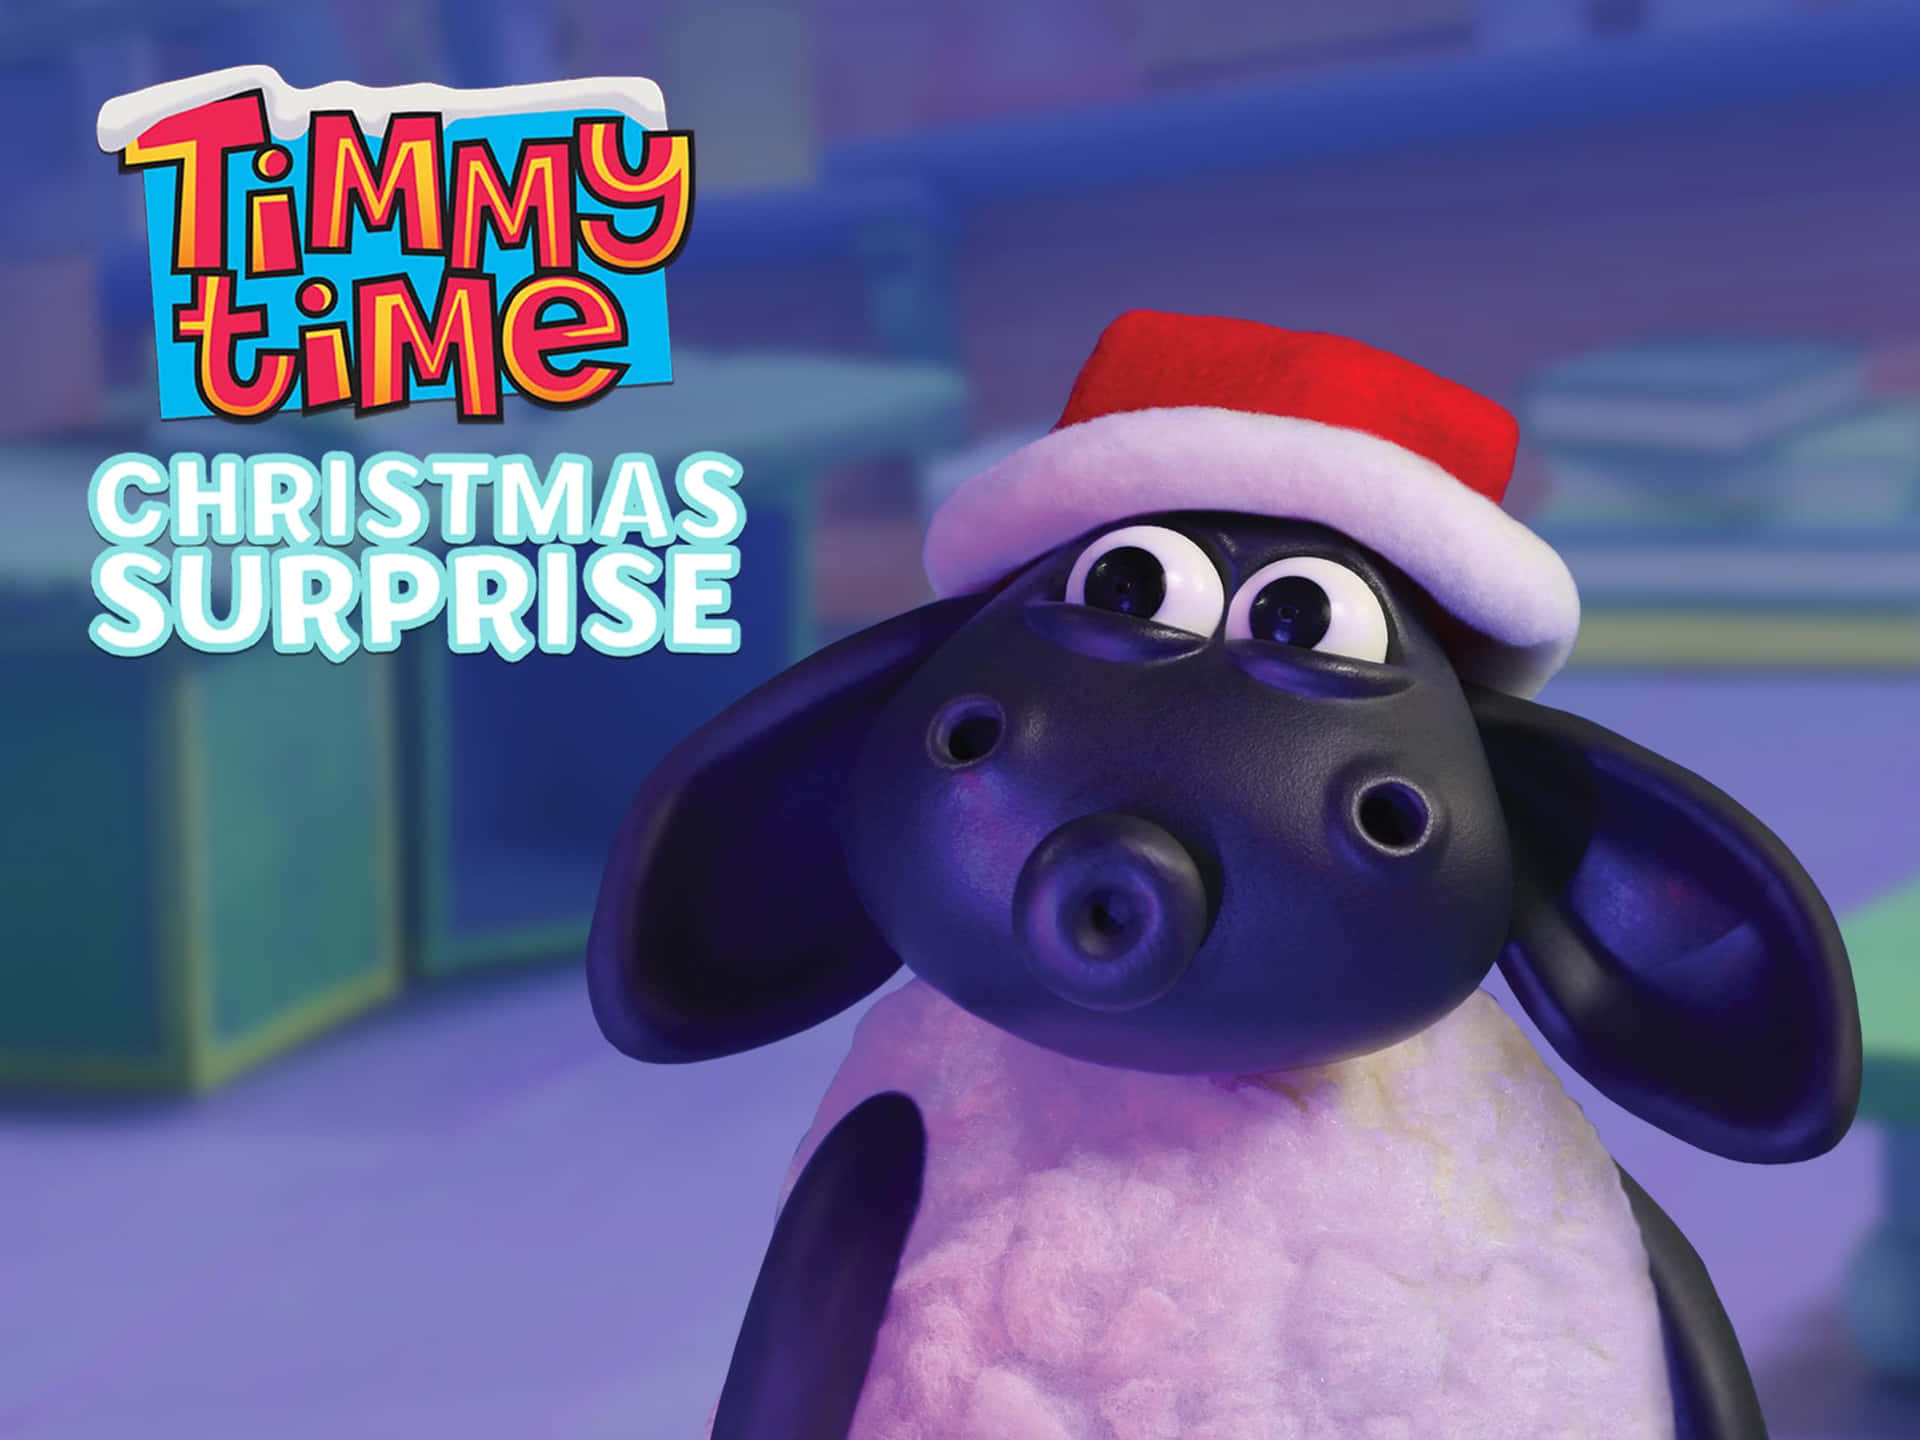 Timmy Time Christmas Surprise Wallpaper